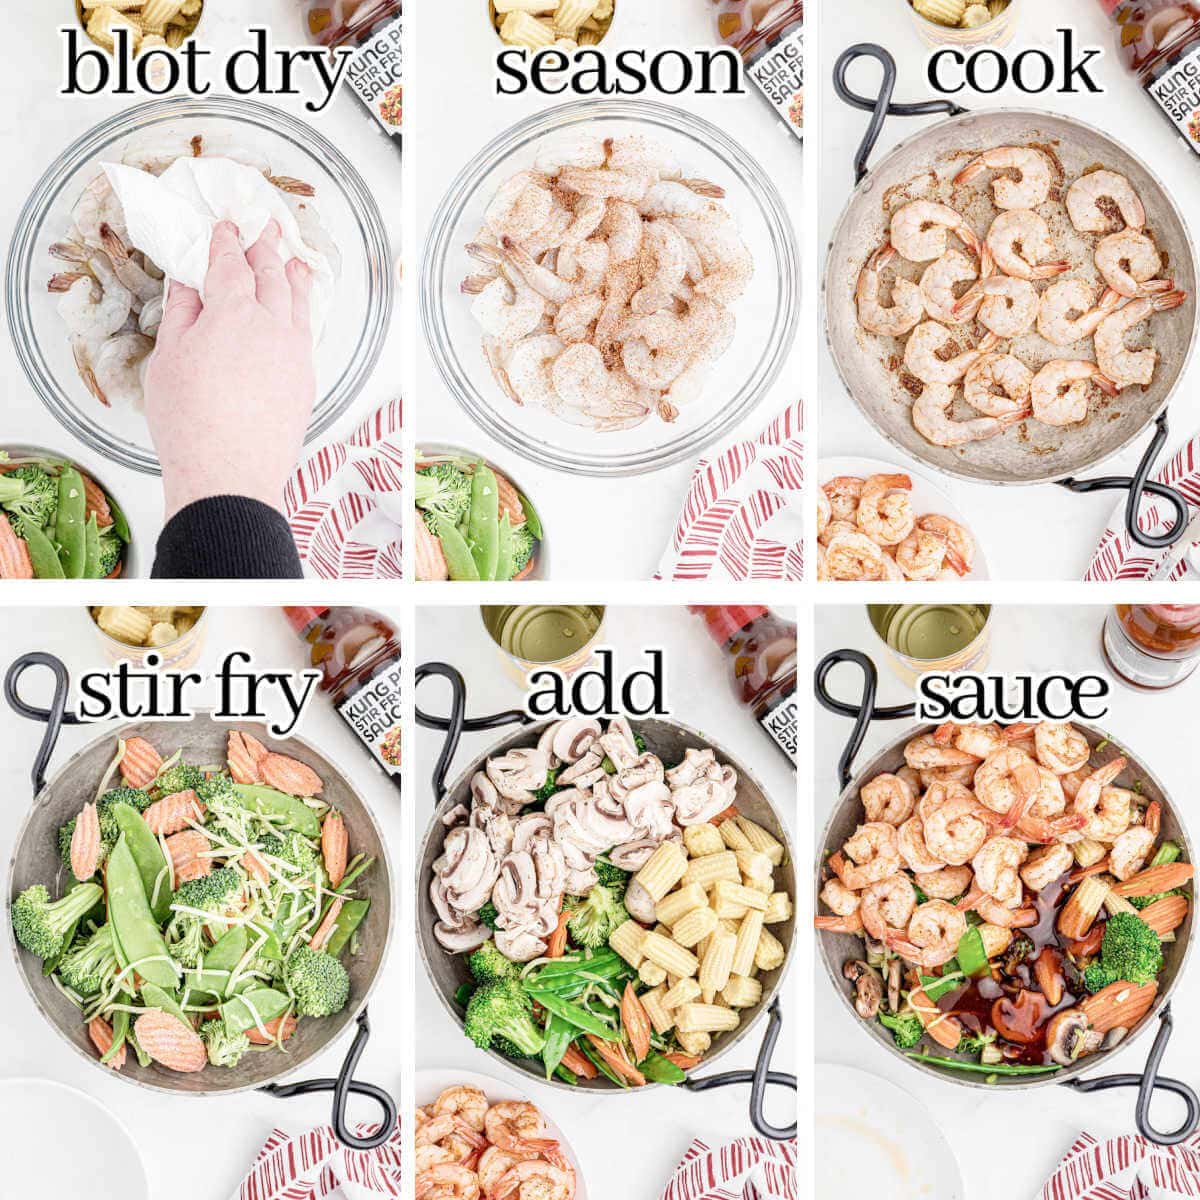 Step by step instructions to cook stir fry, with print overlay.